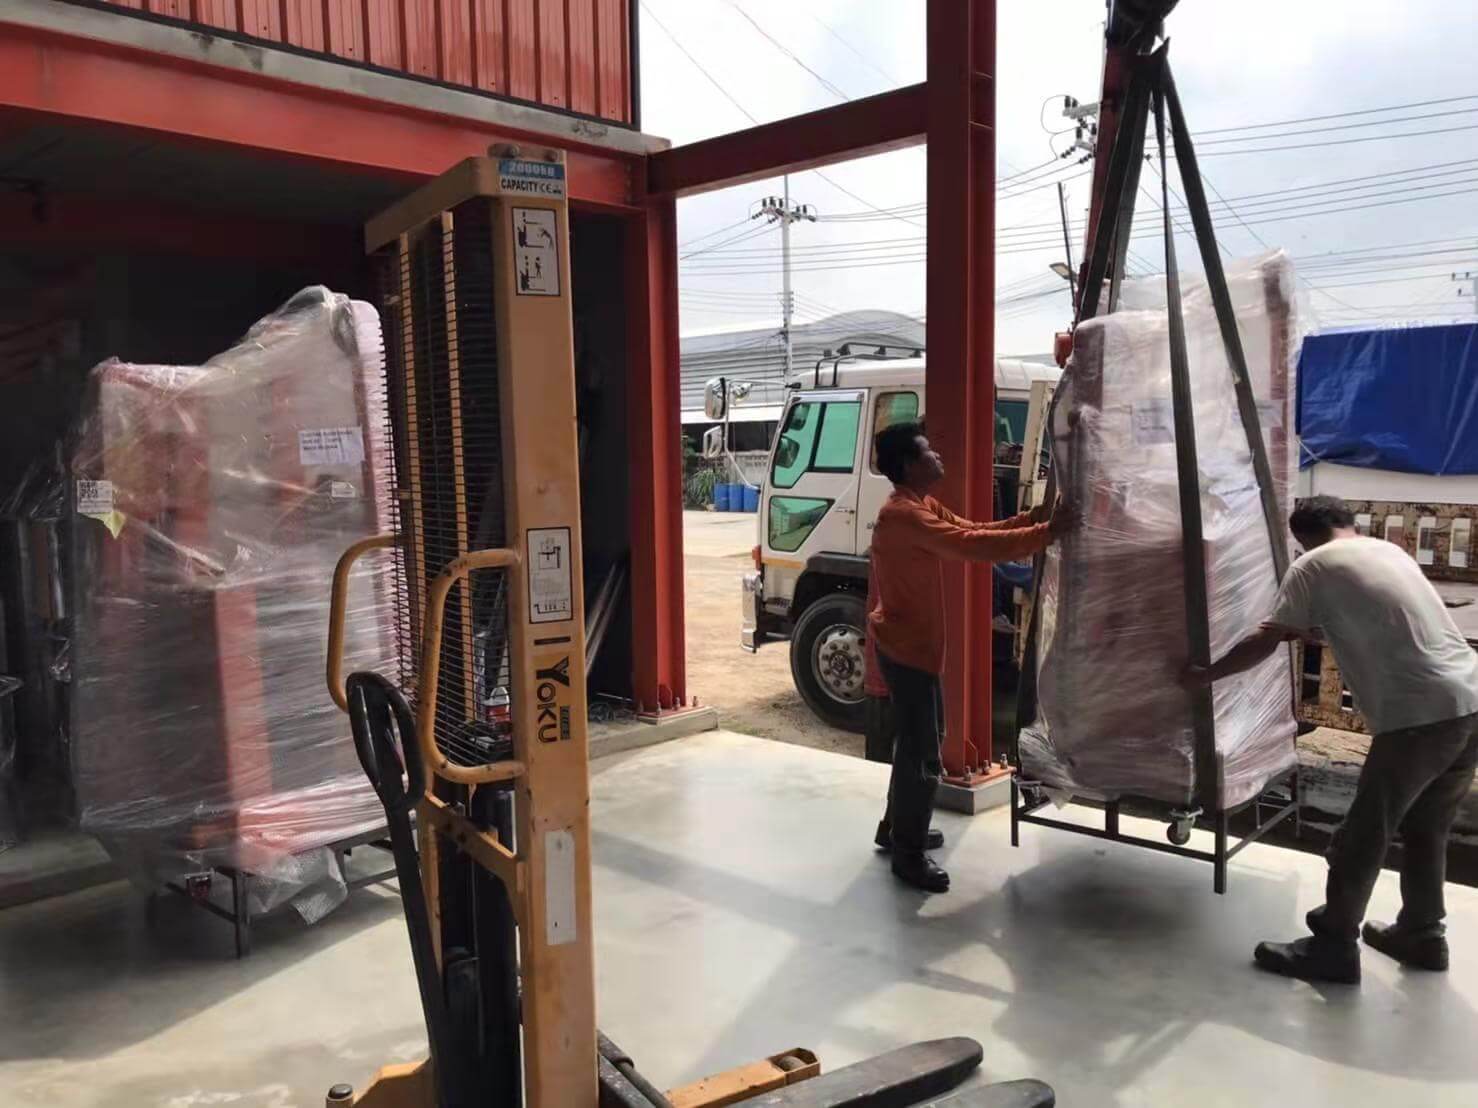 1t fully powered Electric floor crane has arrived in Thailand-4.jpg